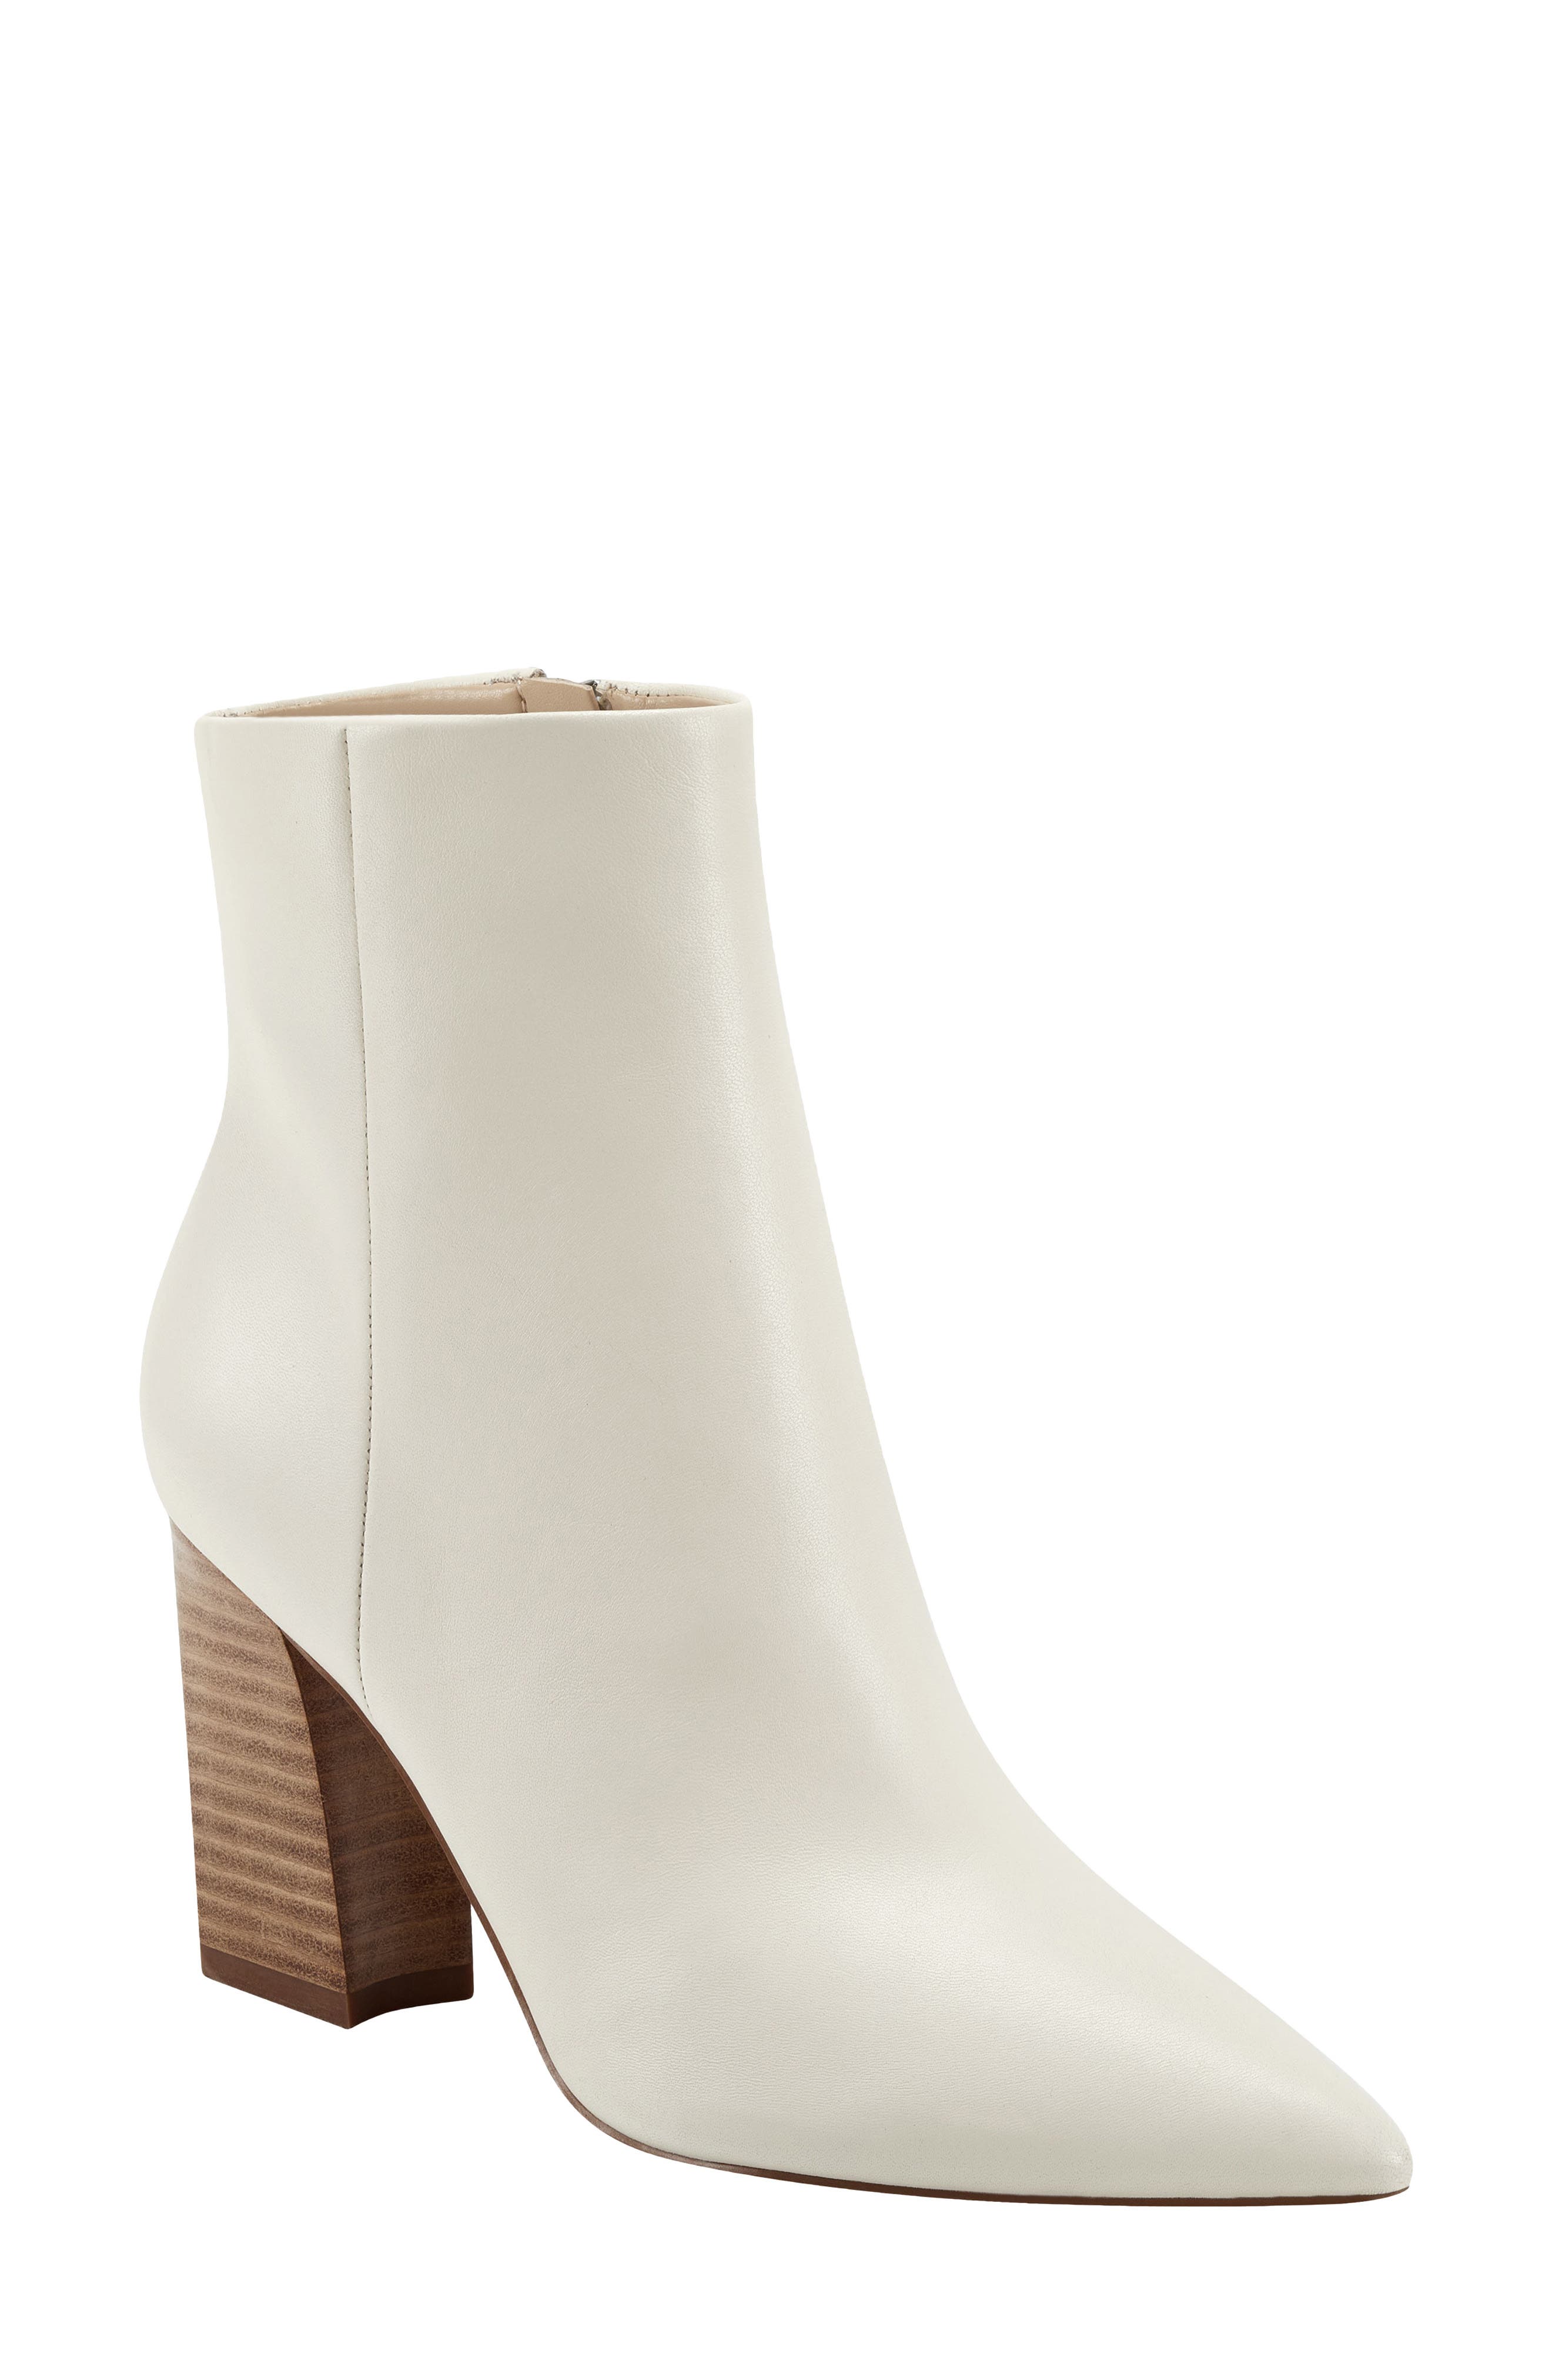 white marc fisher booties